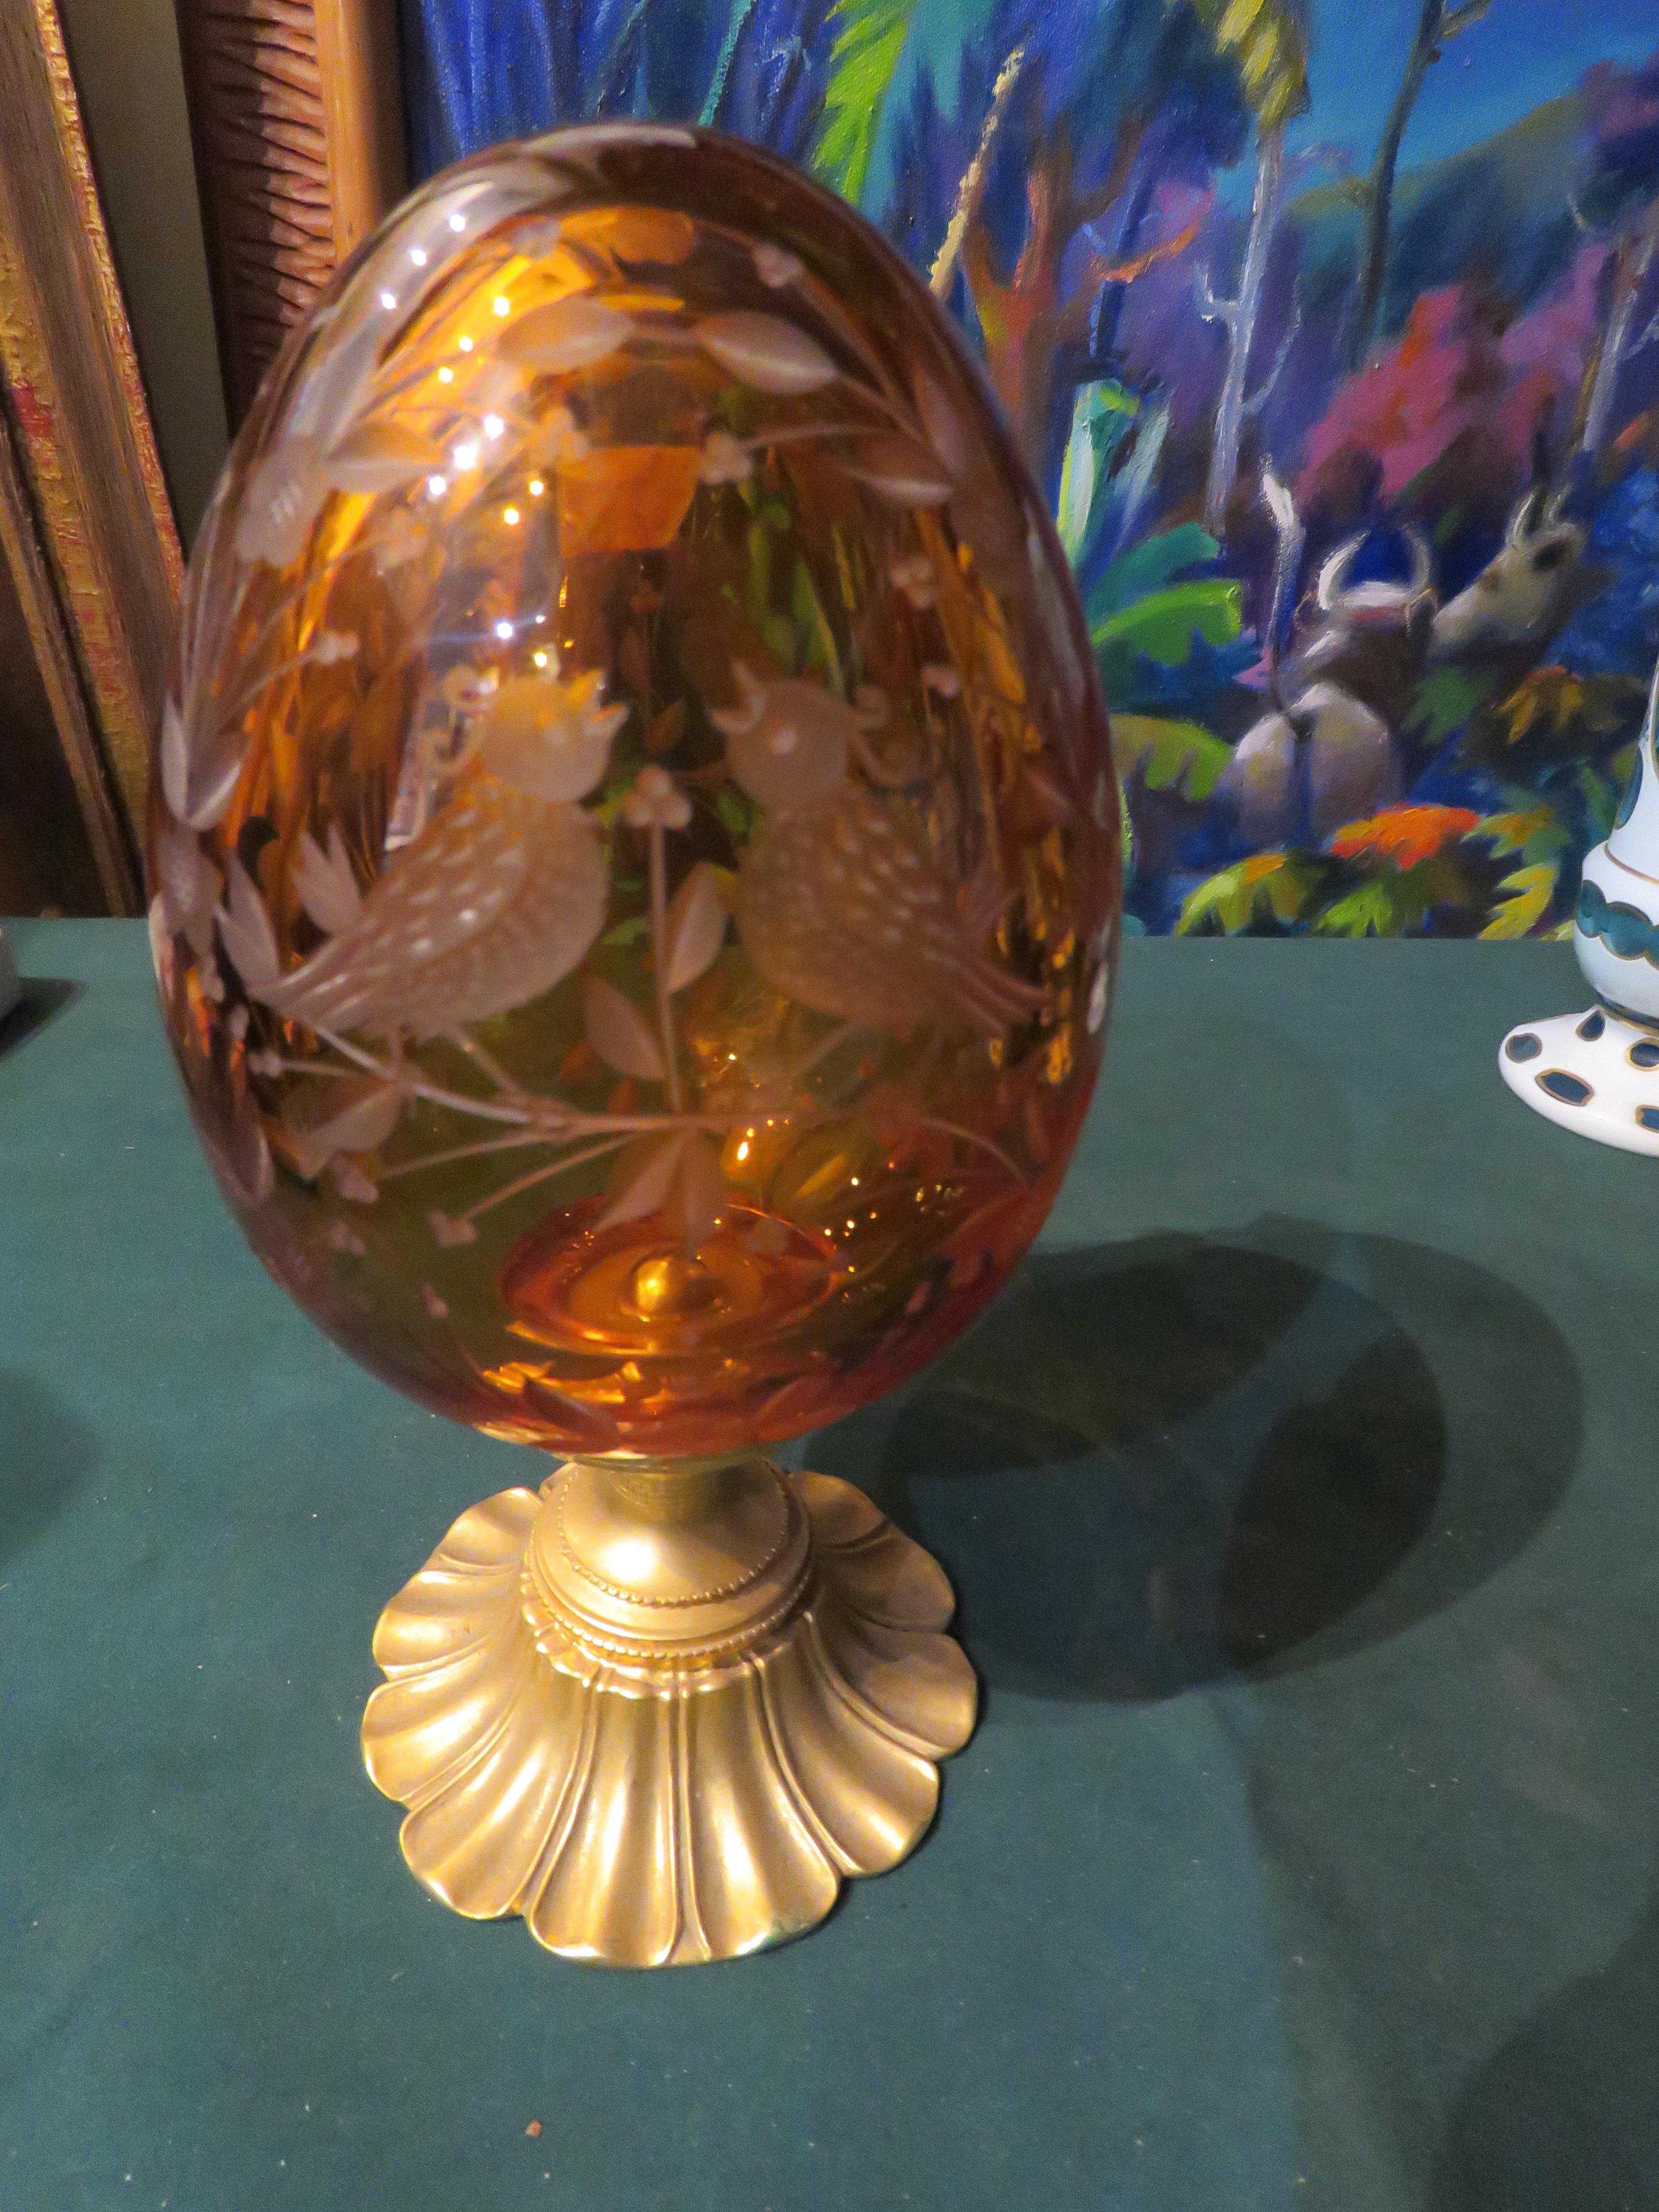 The Following Item we are offering is A Magnificent Beautiful 24KT Gold Leaf Amber Crystal Egg in the style of Faberge. Beautifully done with Fine 24KT Gold Leaf and Gilt Bronze and Intricate Scrolled Detail and Outstanding Handcut Ornate Accent